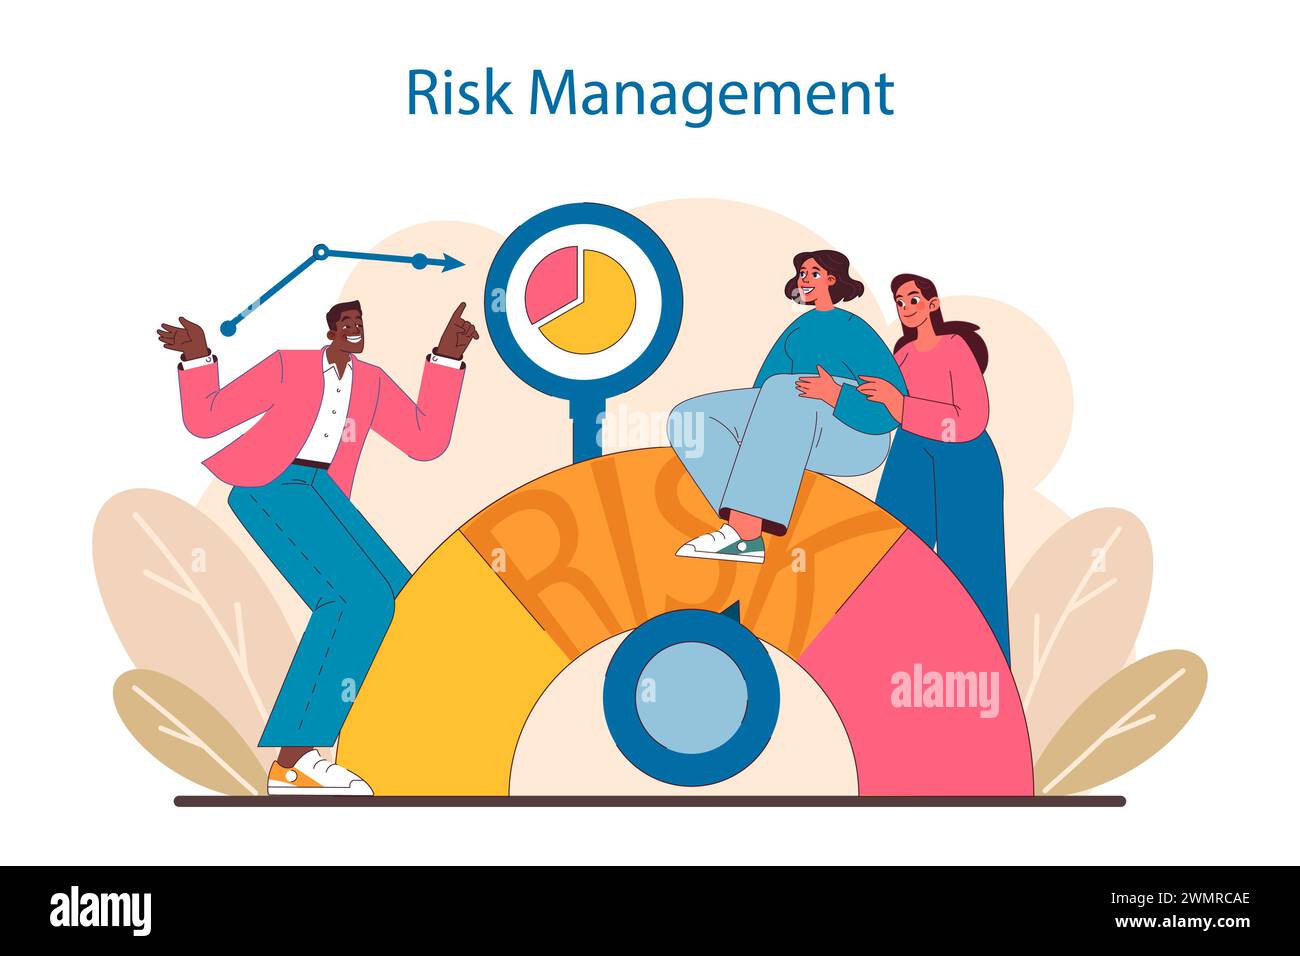 Risk Management in IT project management. Portrays proactive identification and mitigation of potential issues, with a focus on strategic analysis and risk assessment. Flat vector illustration. Stock Vector